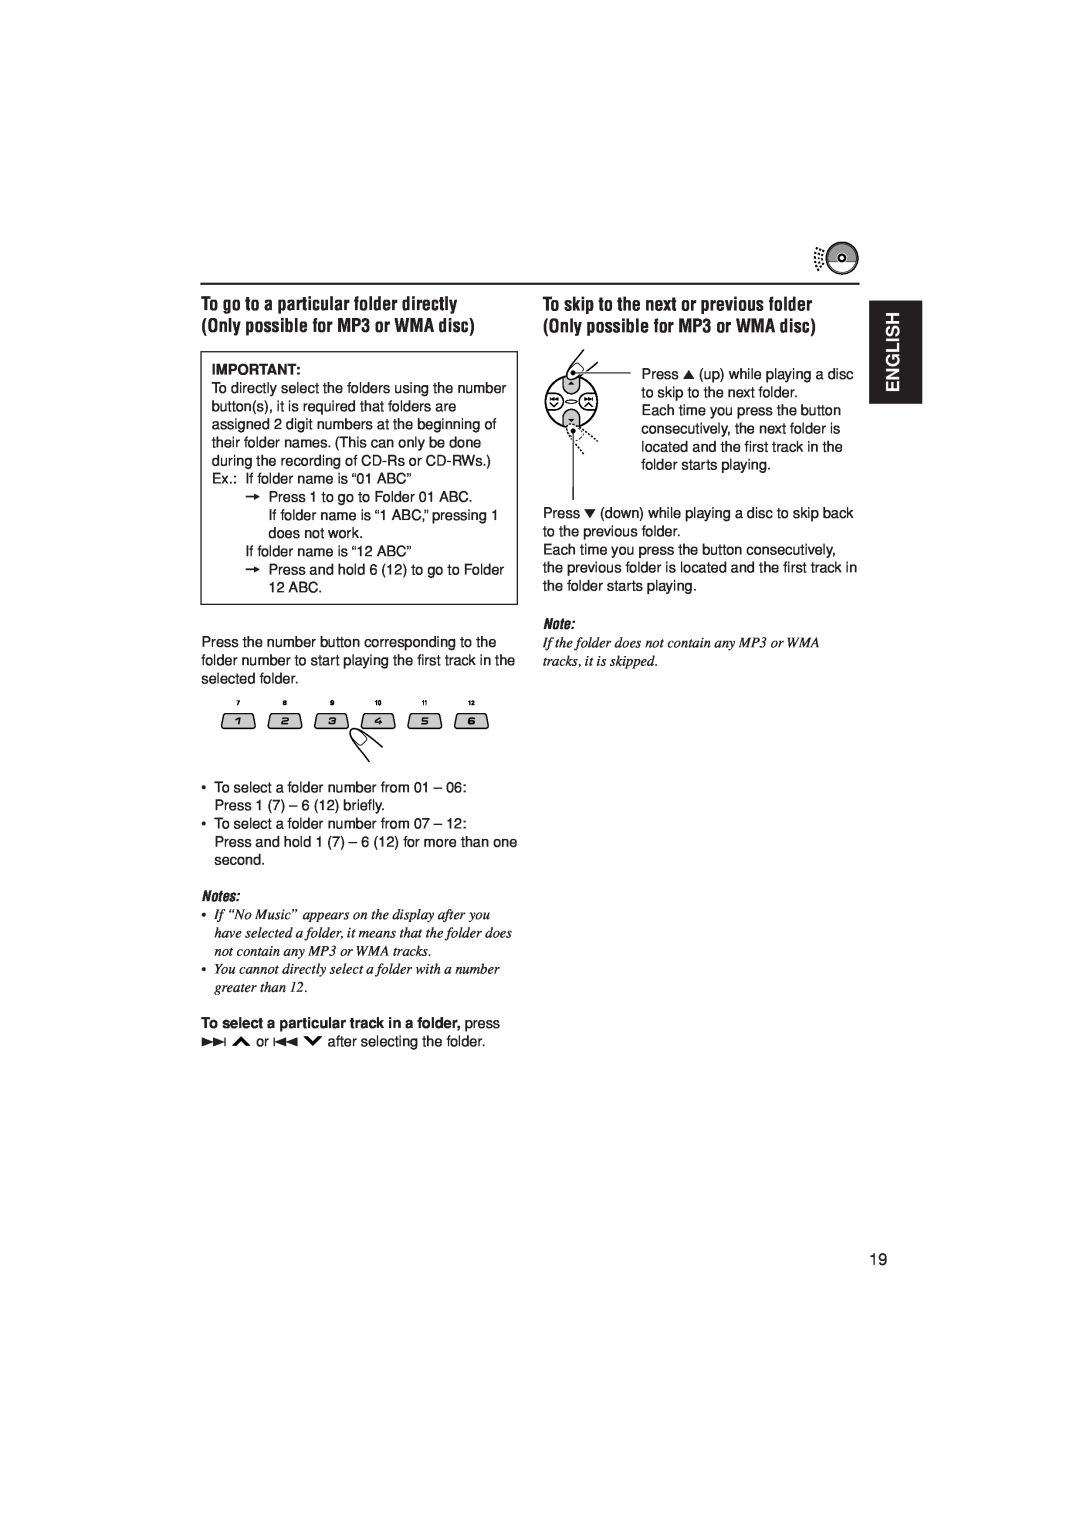 JVC KD-LH305 manual English, To select a particular track in a folder, press 